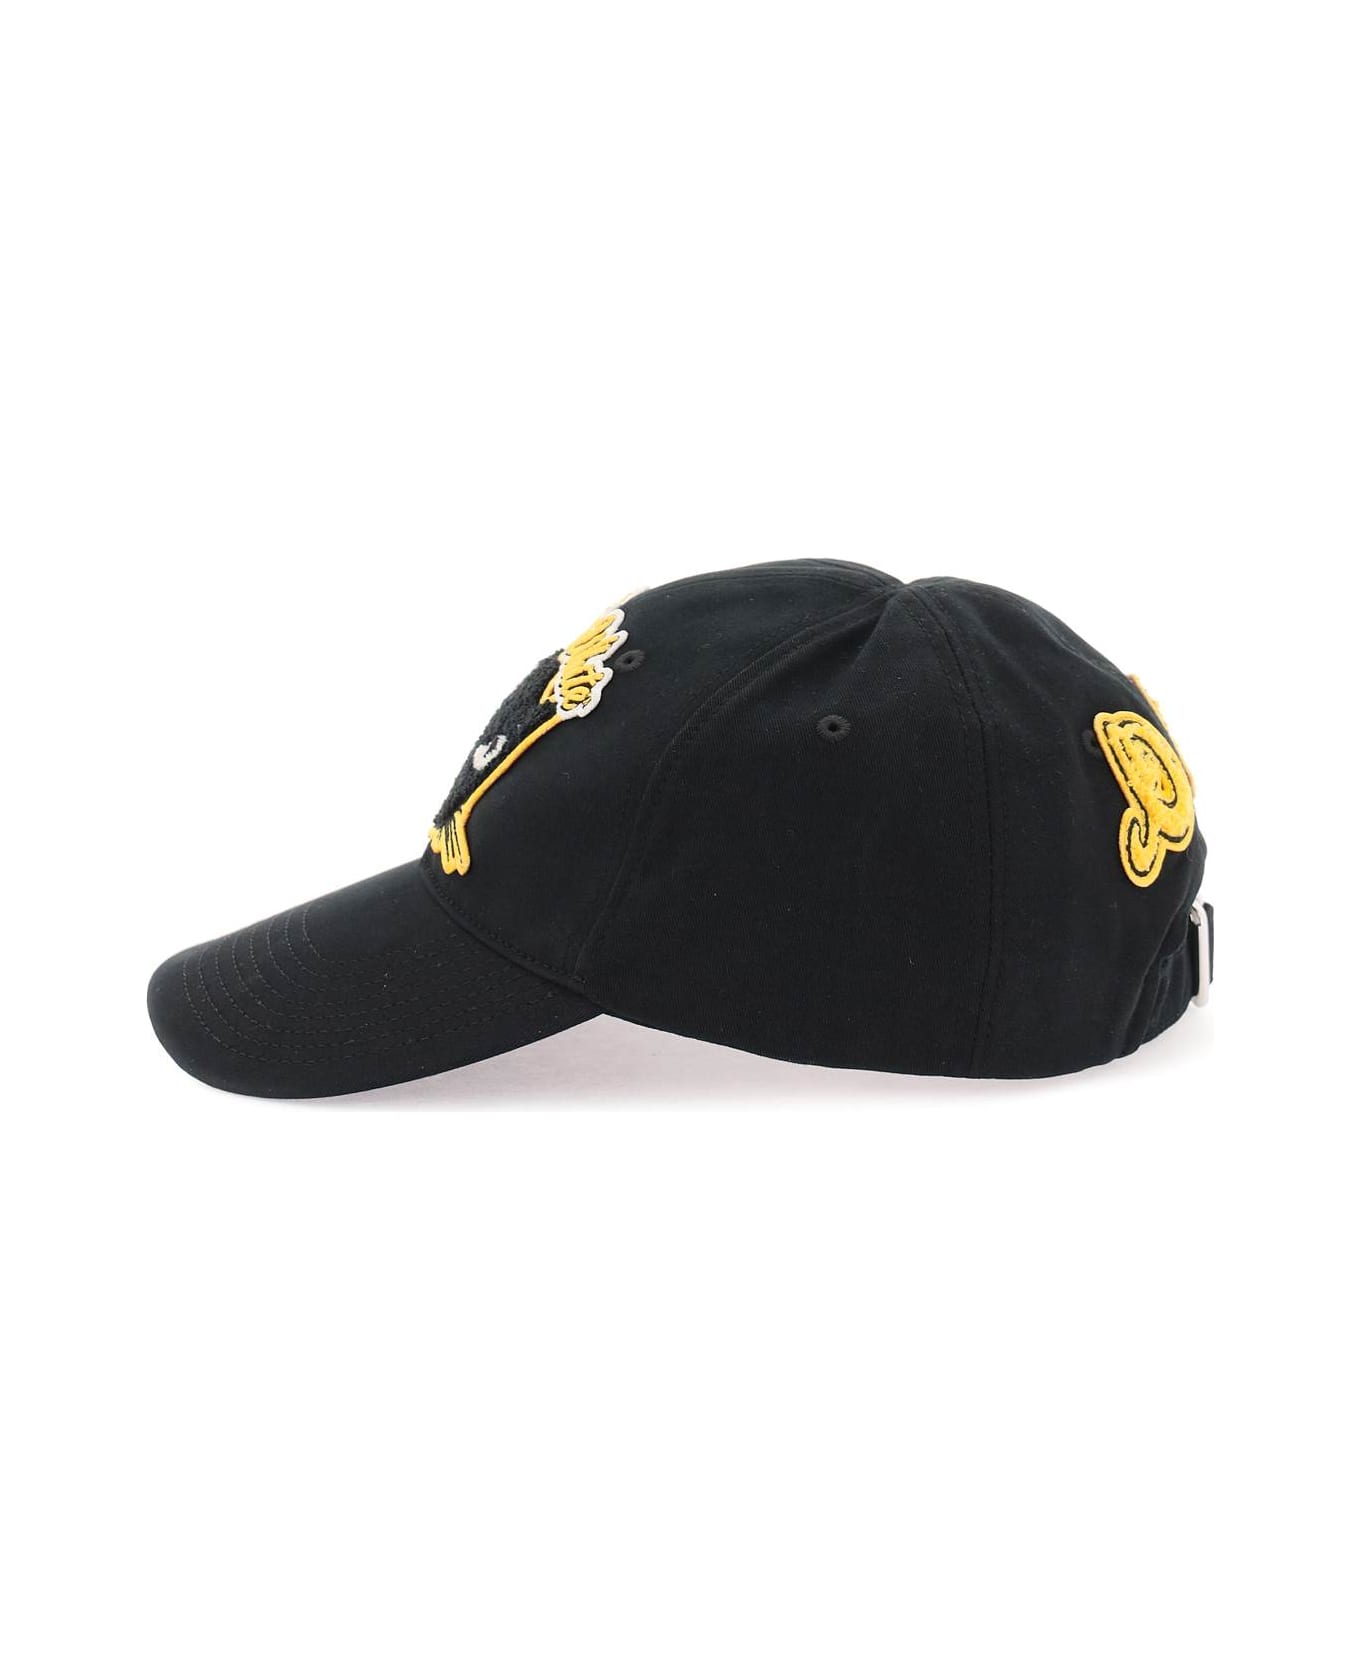 Off-White Baseball Cap With Patch - BLACK YELLOW (Black)